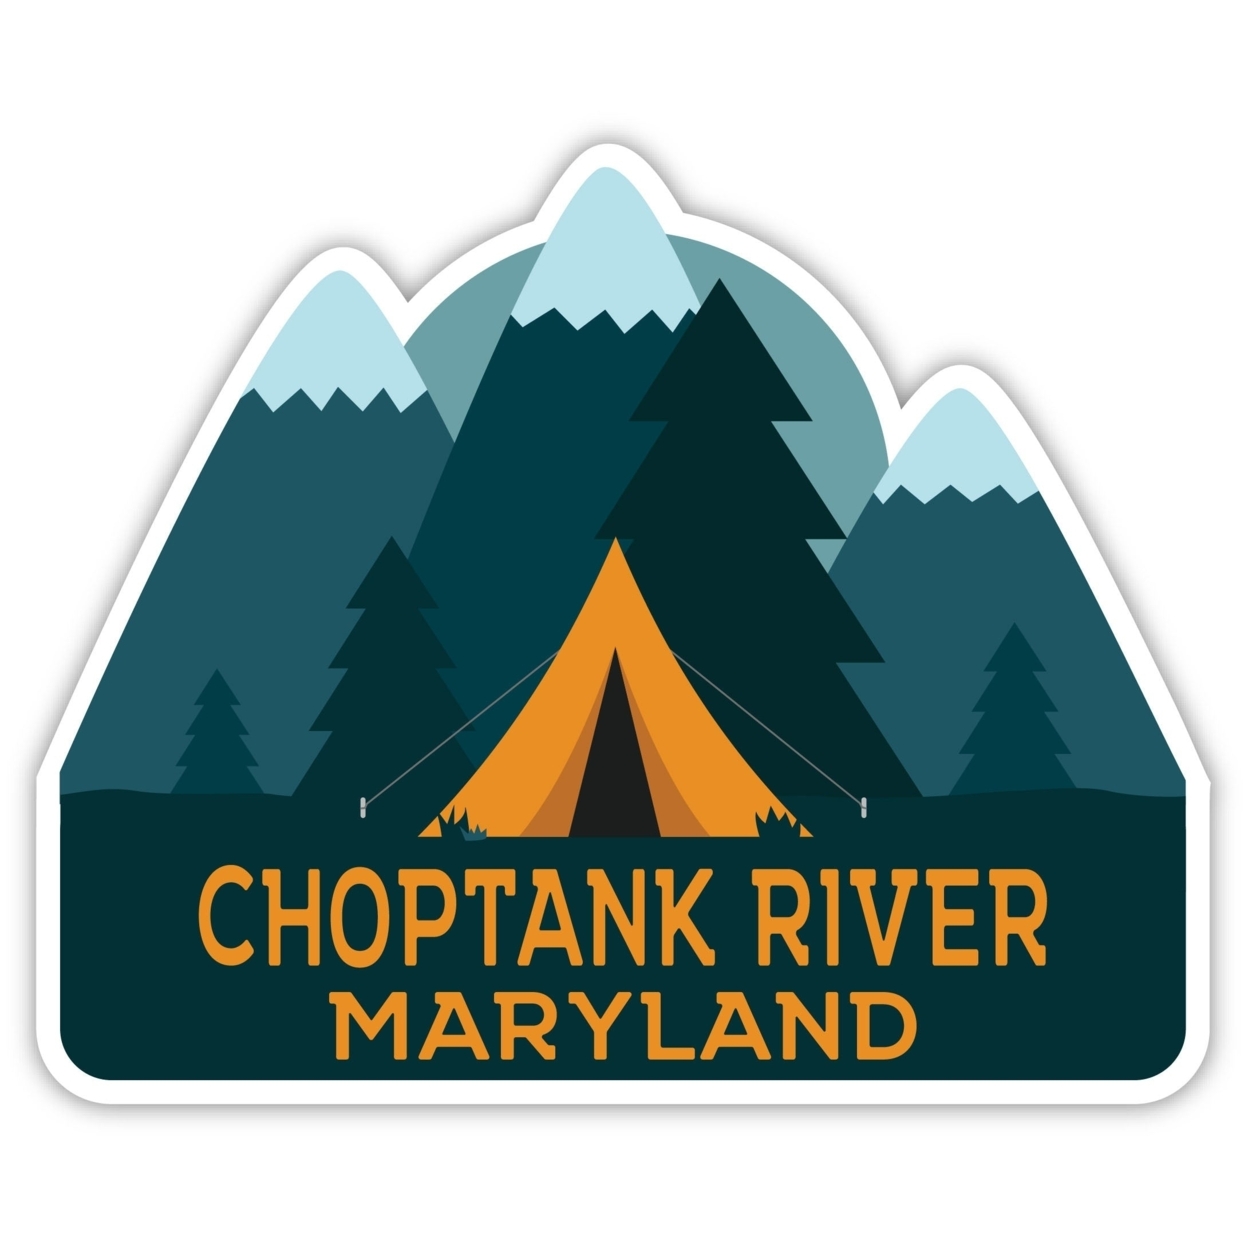 Choptank River Maryland Souvenir Decorative Stickers (Choose Theme And Size) - 4-Pack, 4-Inch, Tent